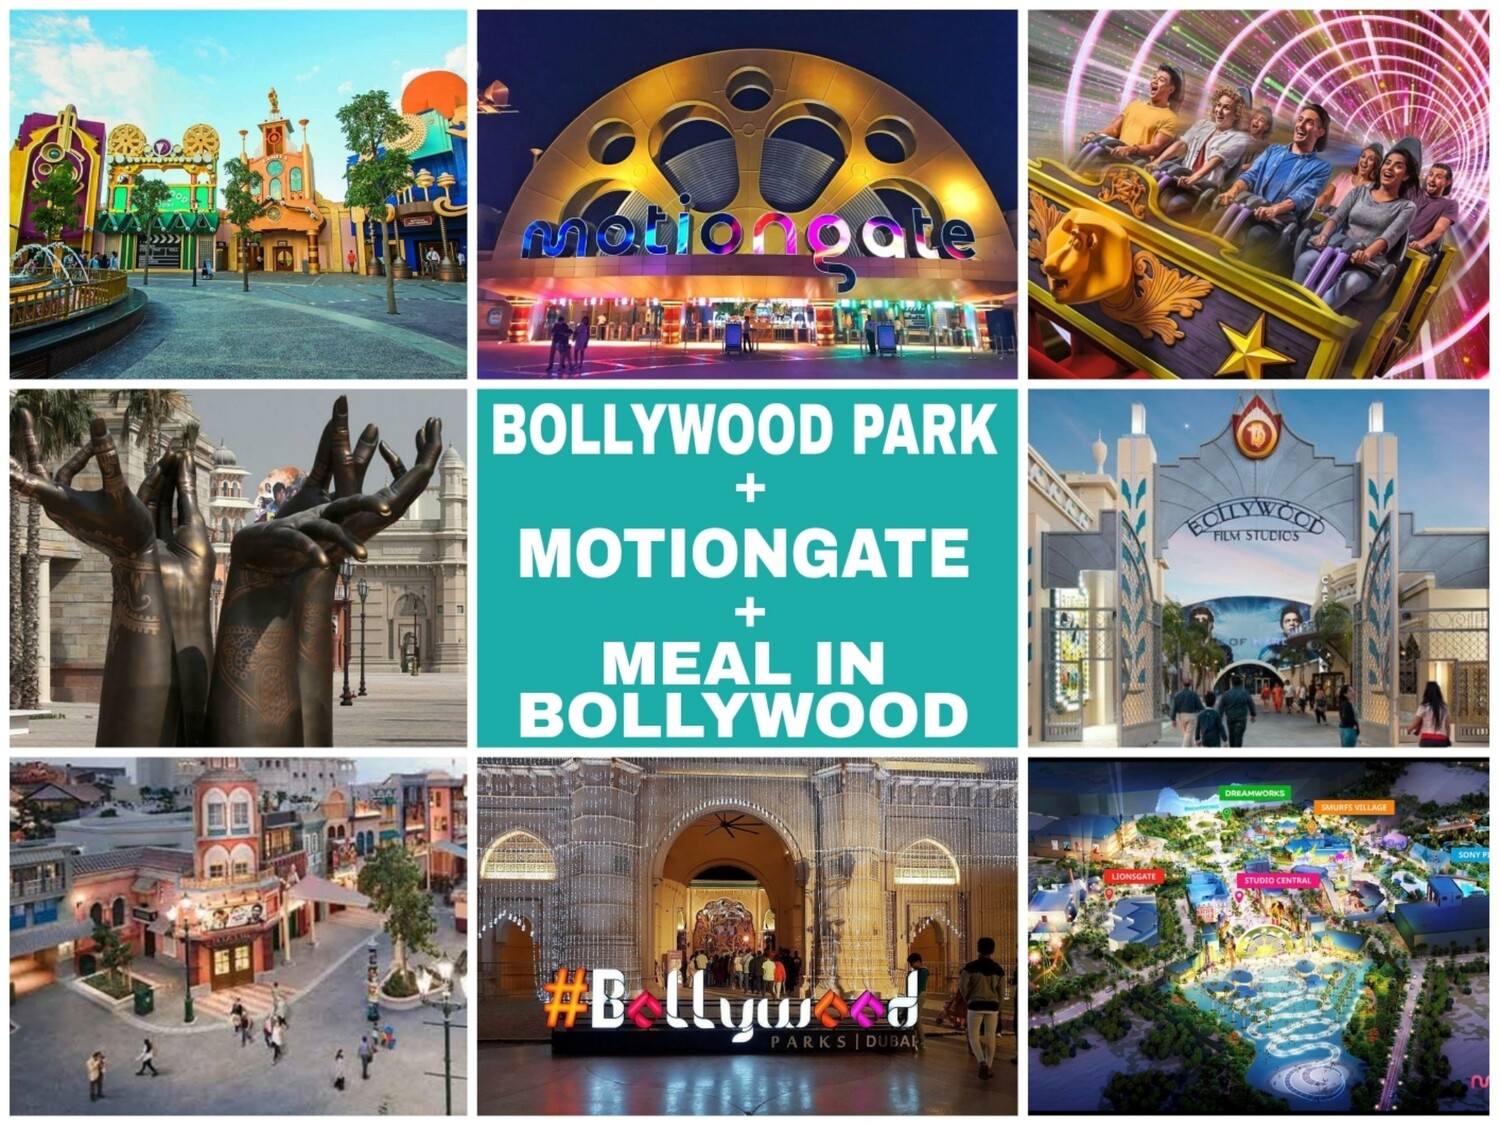 Bollywood Park + Motiongate + Meal in Bollywood